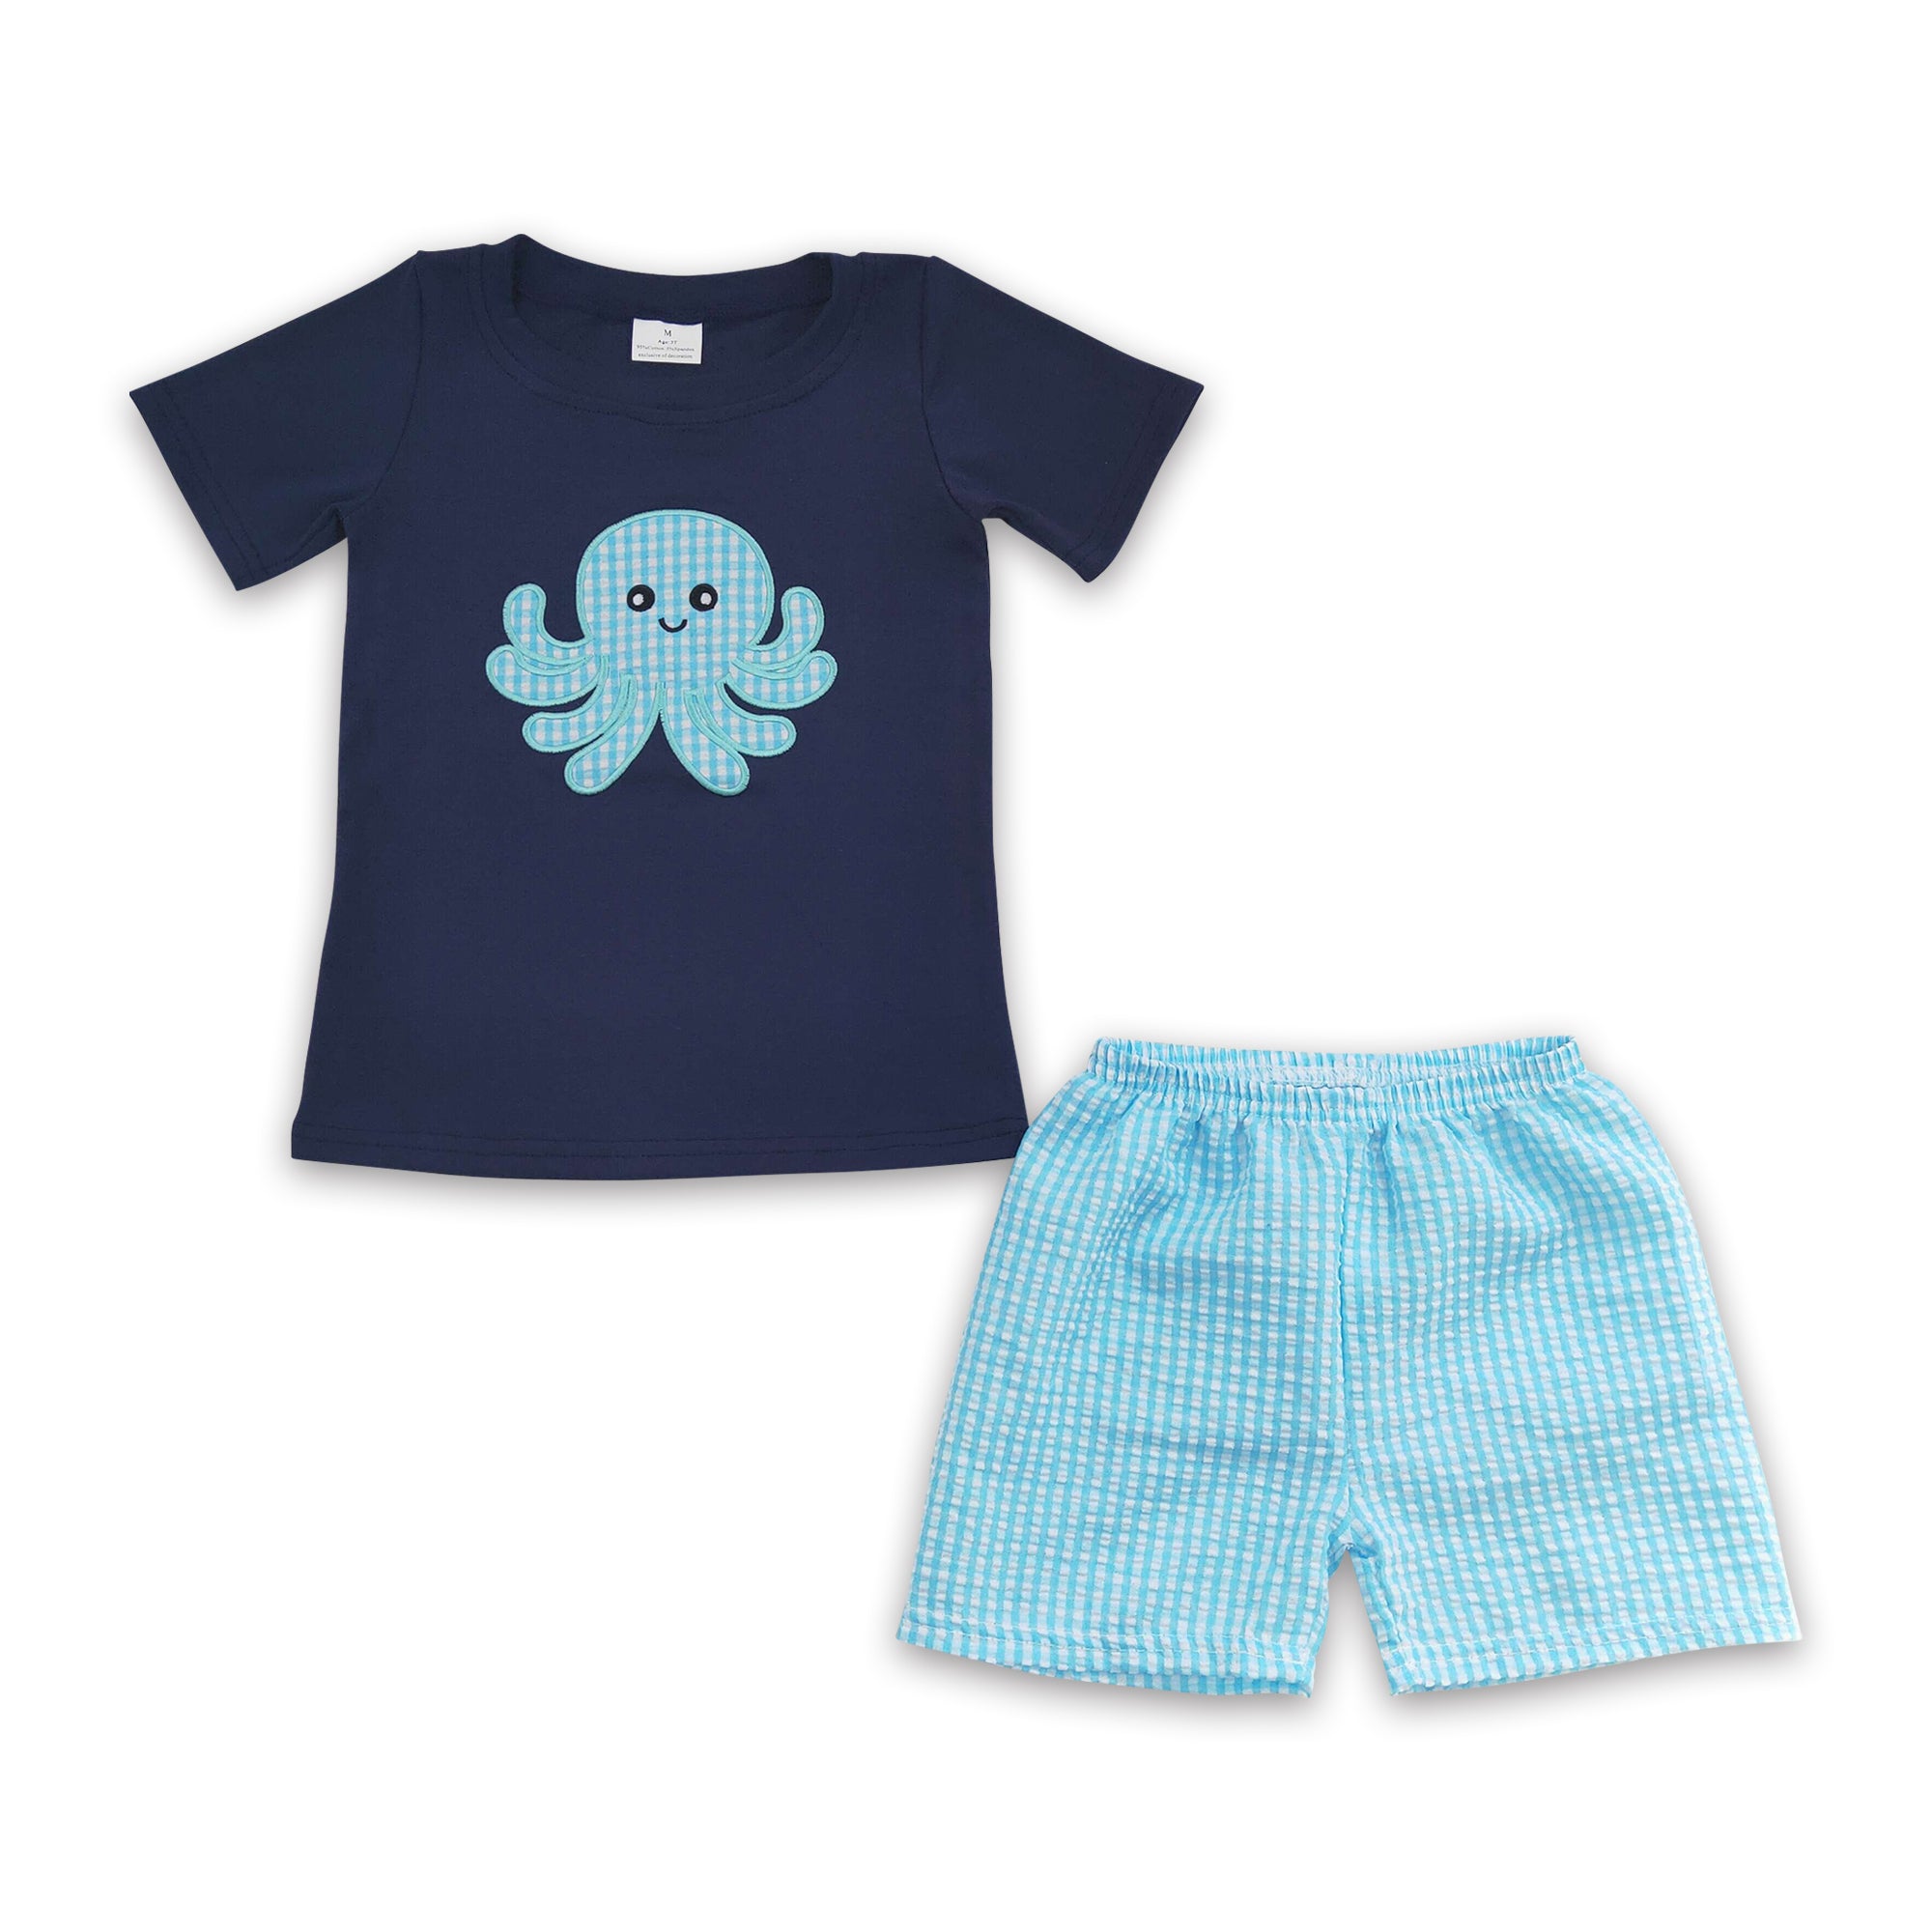 BSSO0088 baby boy clothes octopus embroidery outfits  summer clothing